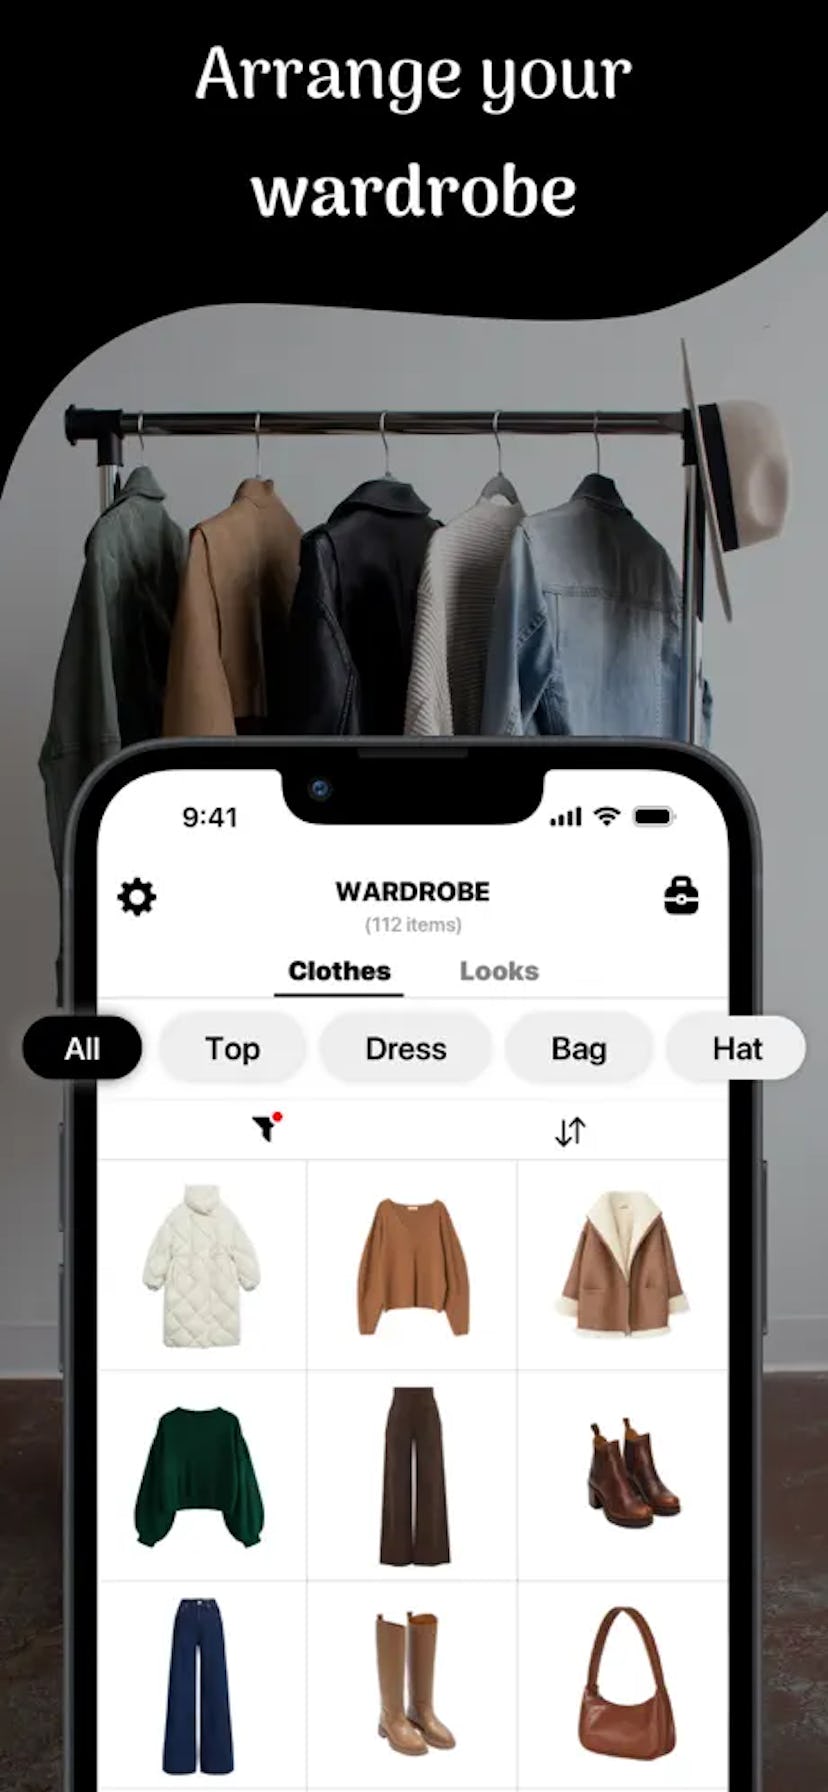 These outfit planning apps will make you feel like Cher Horowitz.